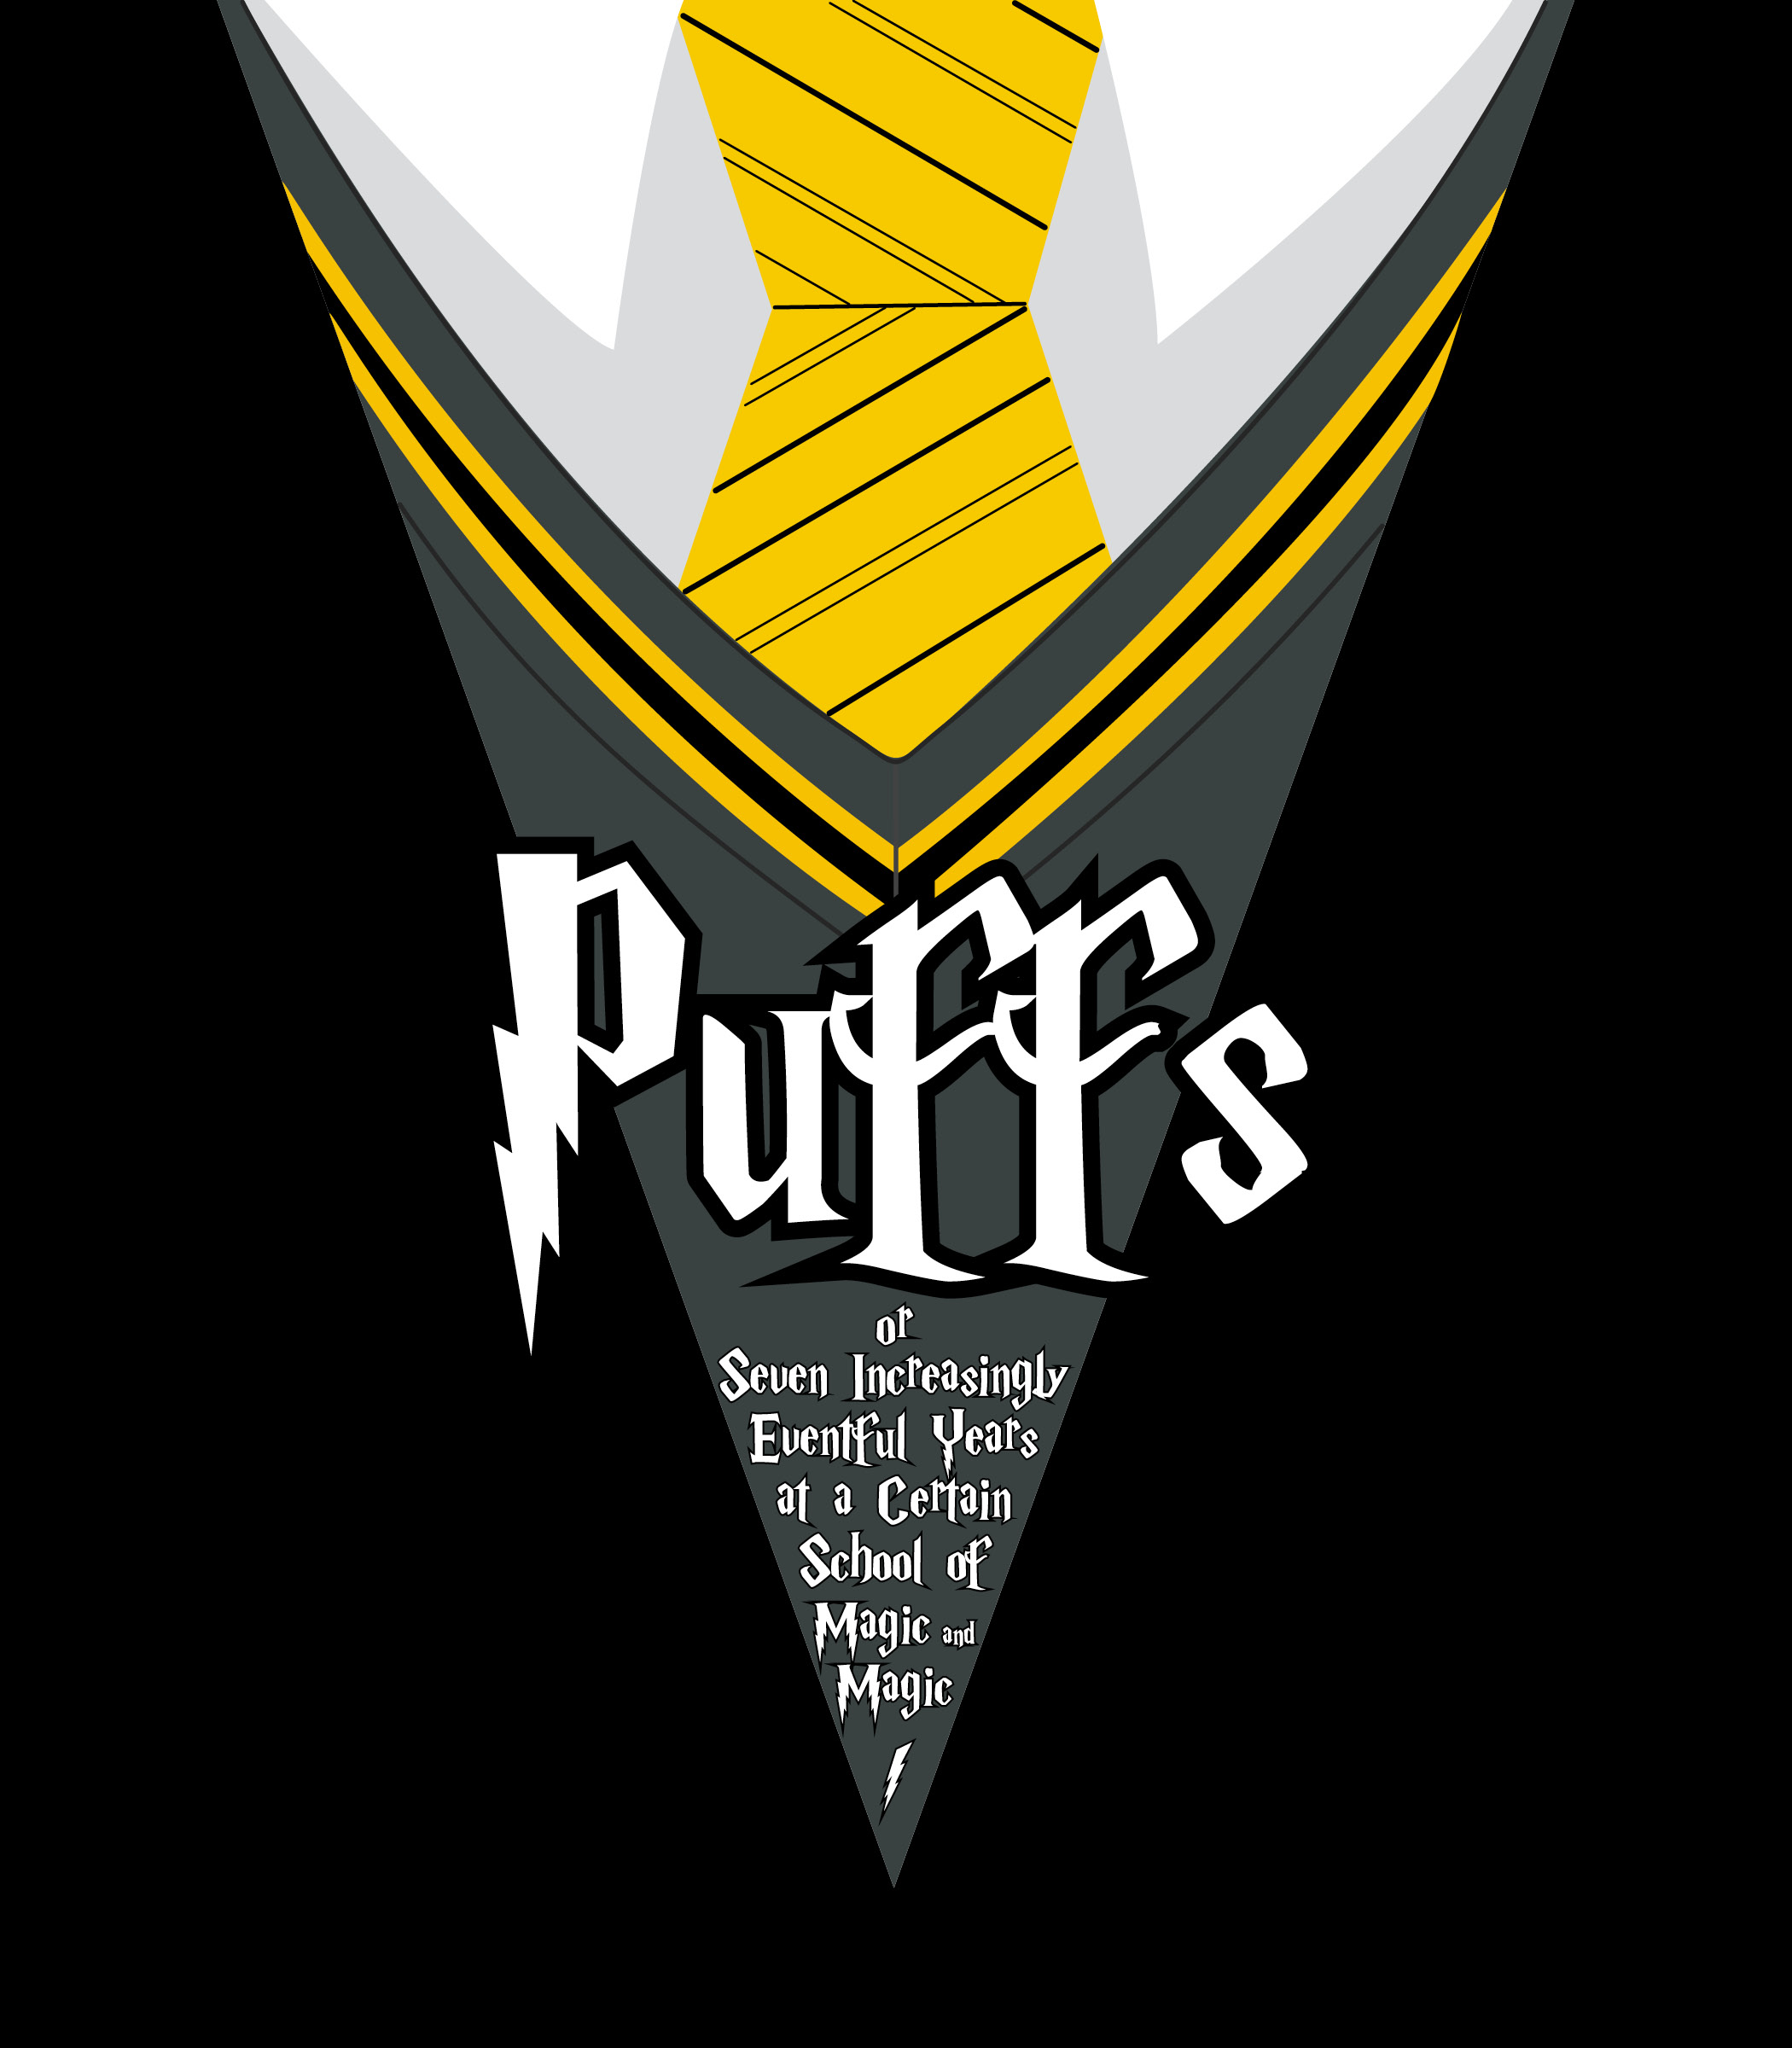 Auditions for “Puffs” Sept 12-13 @ 7PM